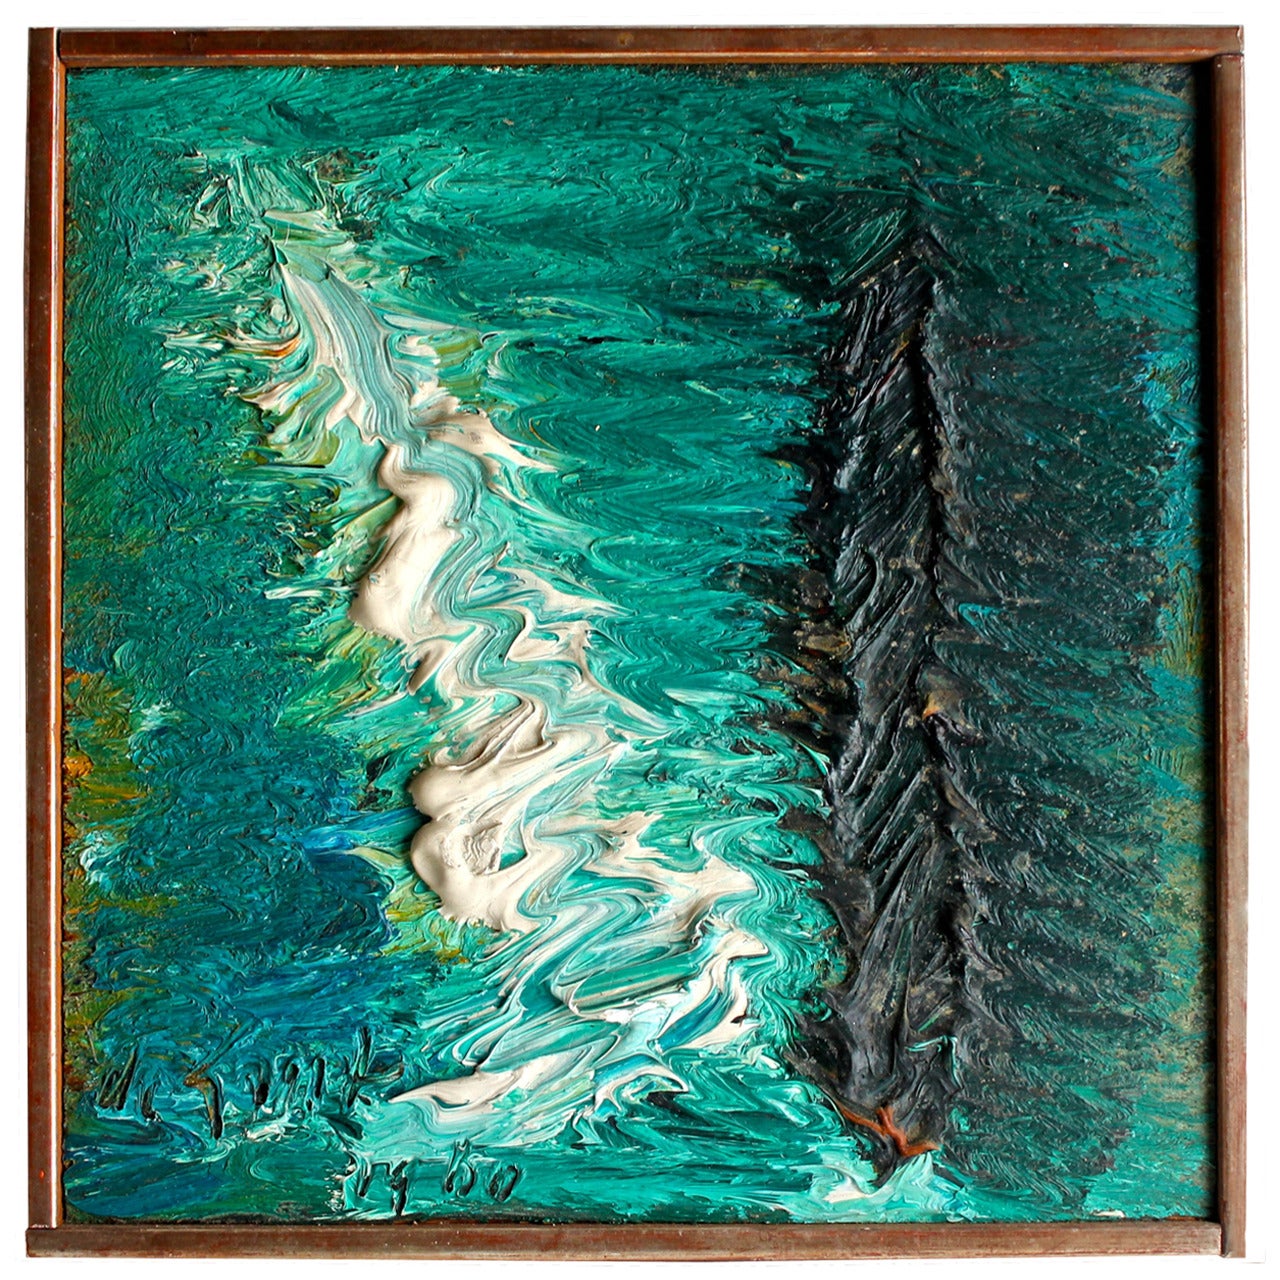 Rare Small Nanno de Groot "Wave" Painting